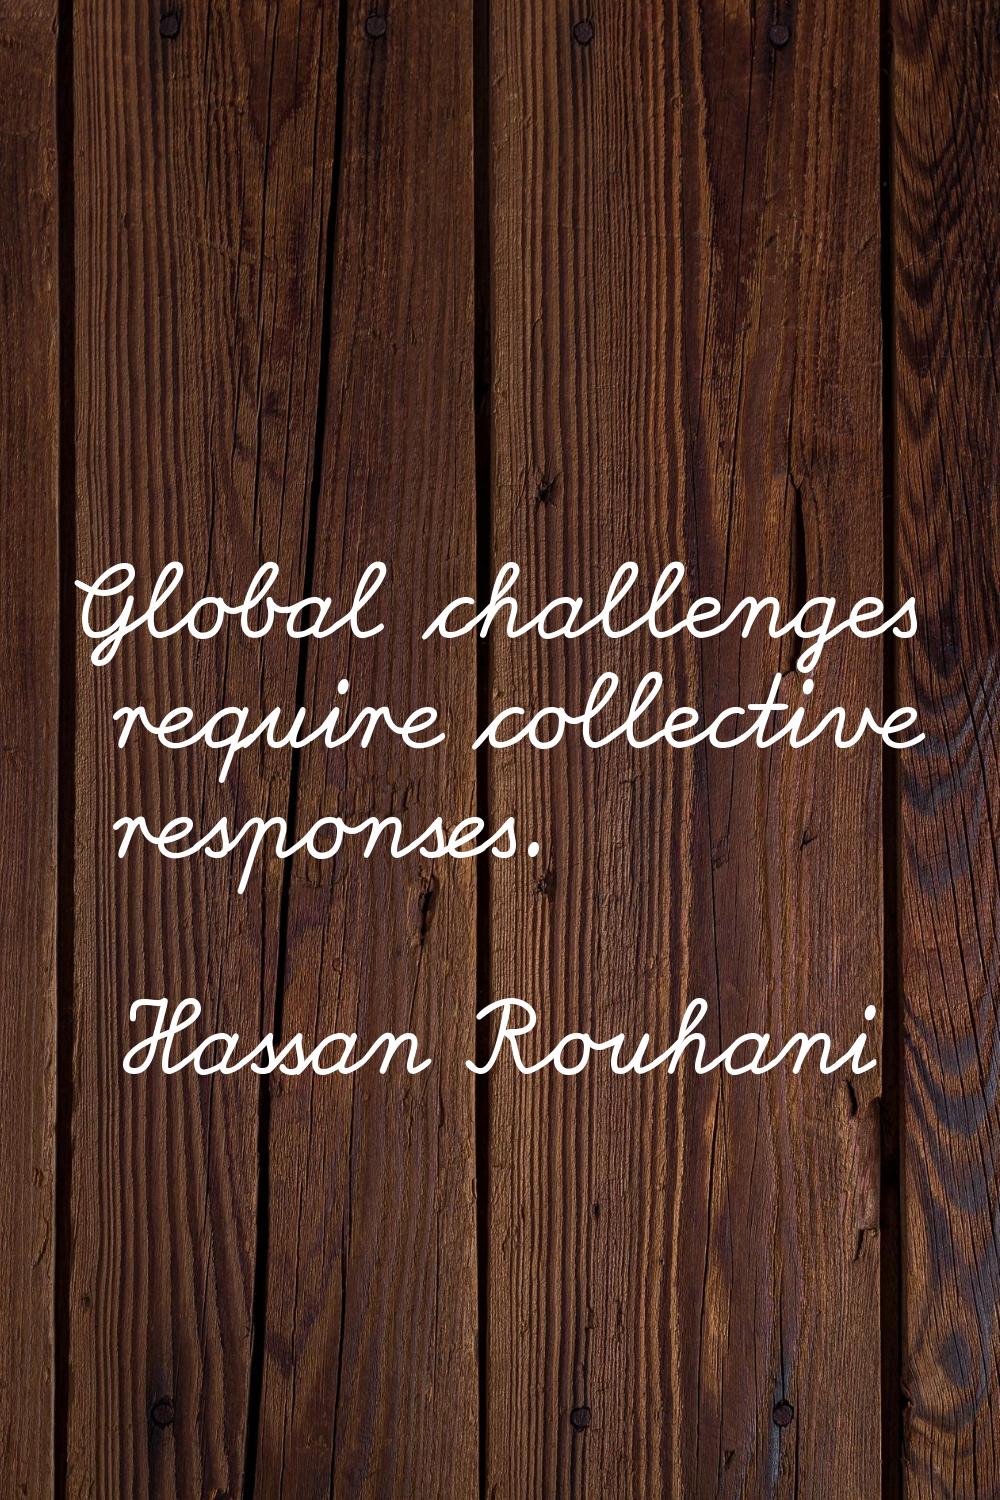 Global challenges require collective responses.